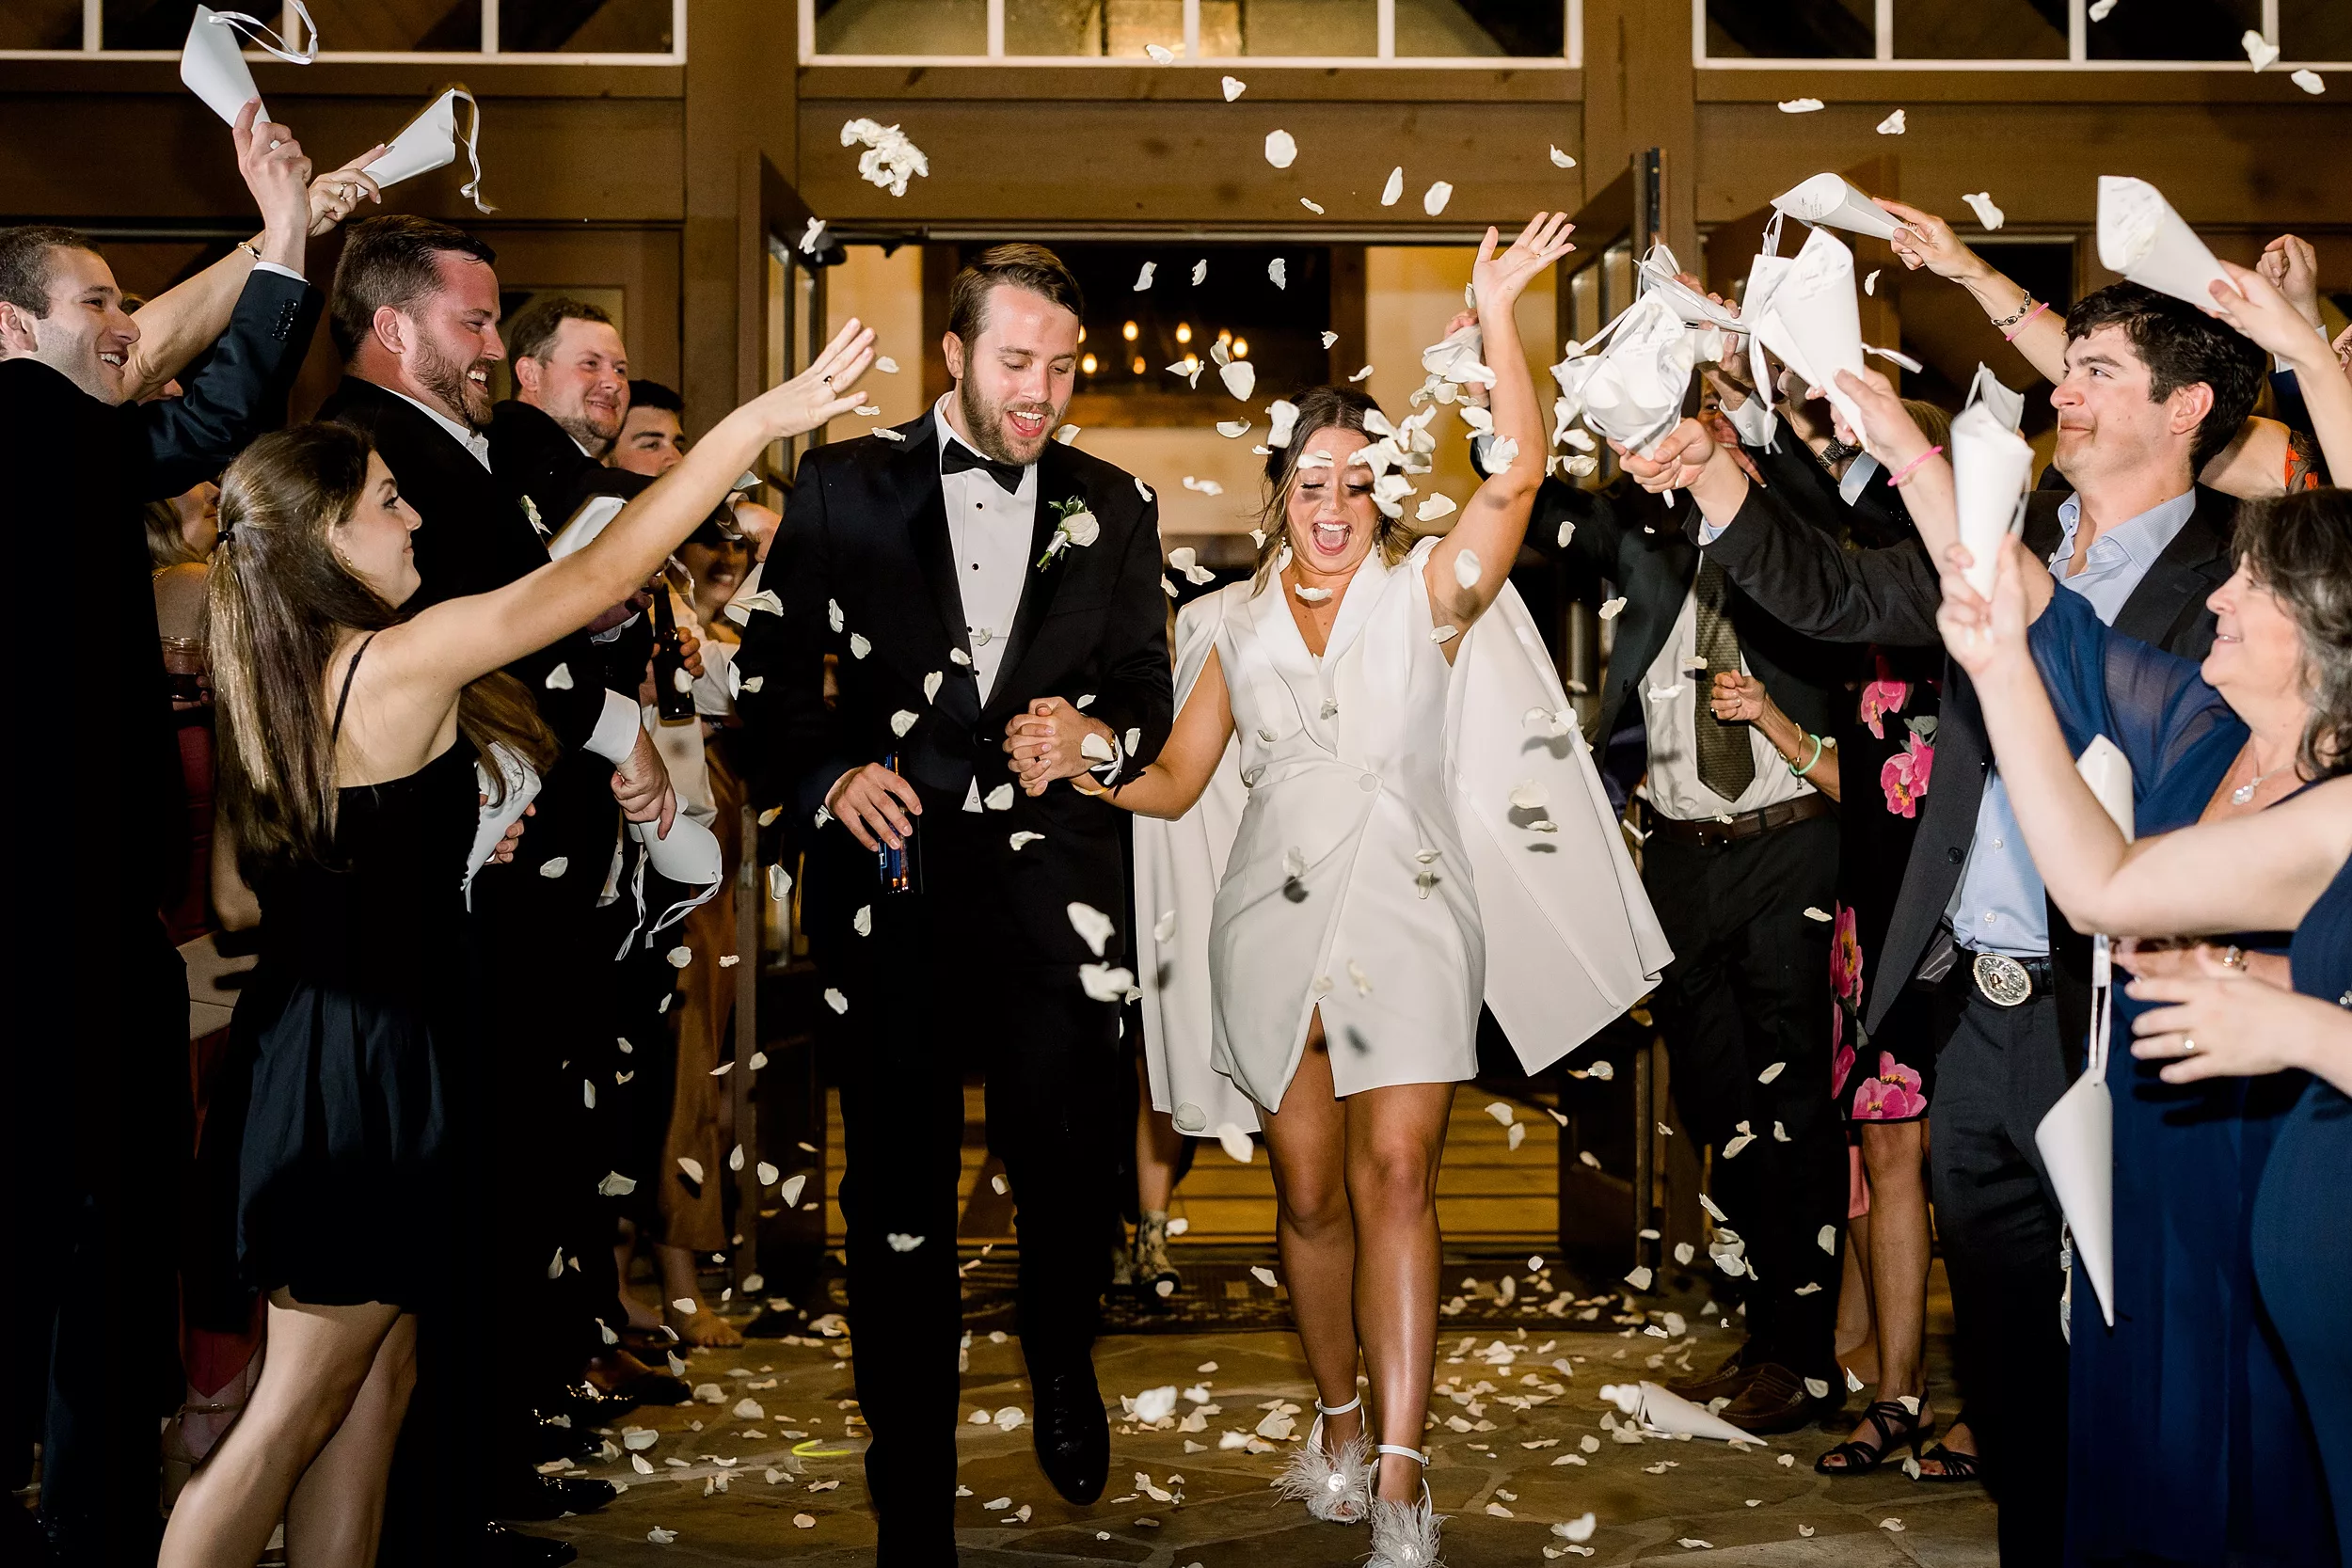 Newlyweds exit their wedding while their guests throw white rose petals over them 